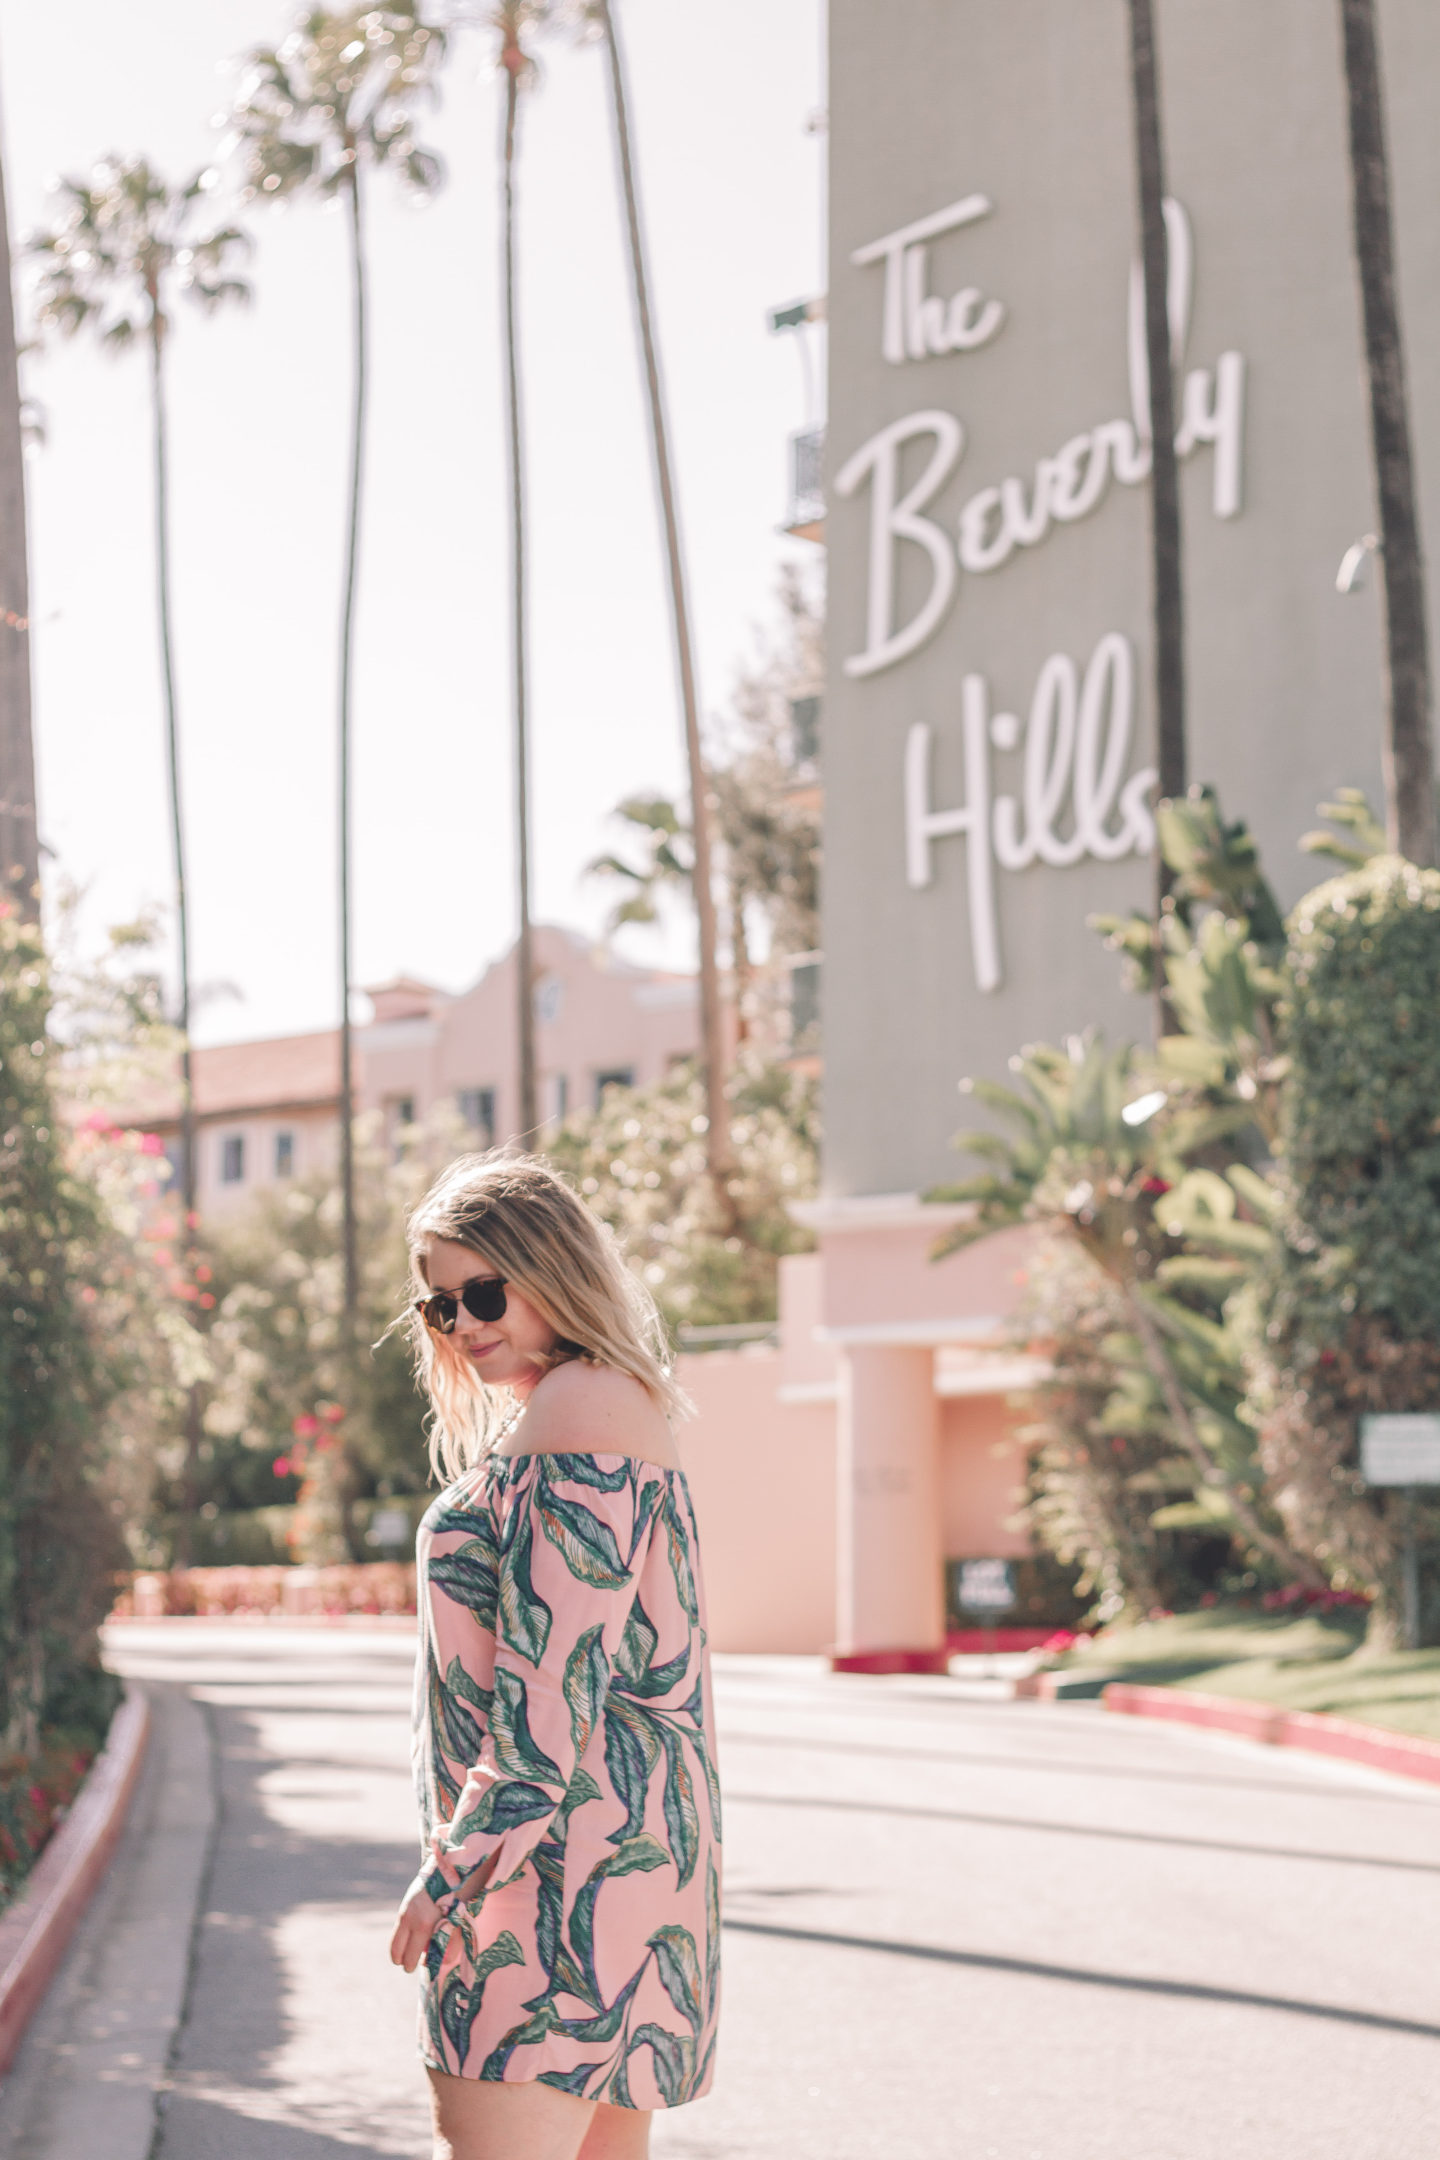 Palm Print Dress at The Beverly Hills Hotel